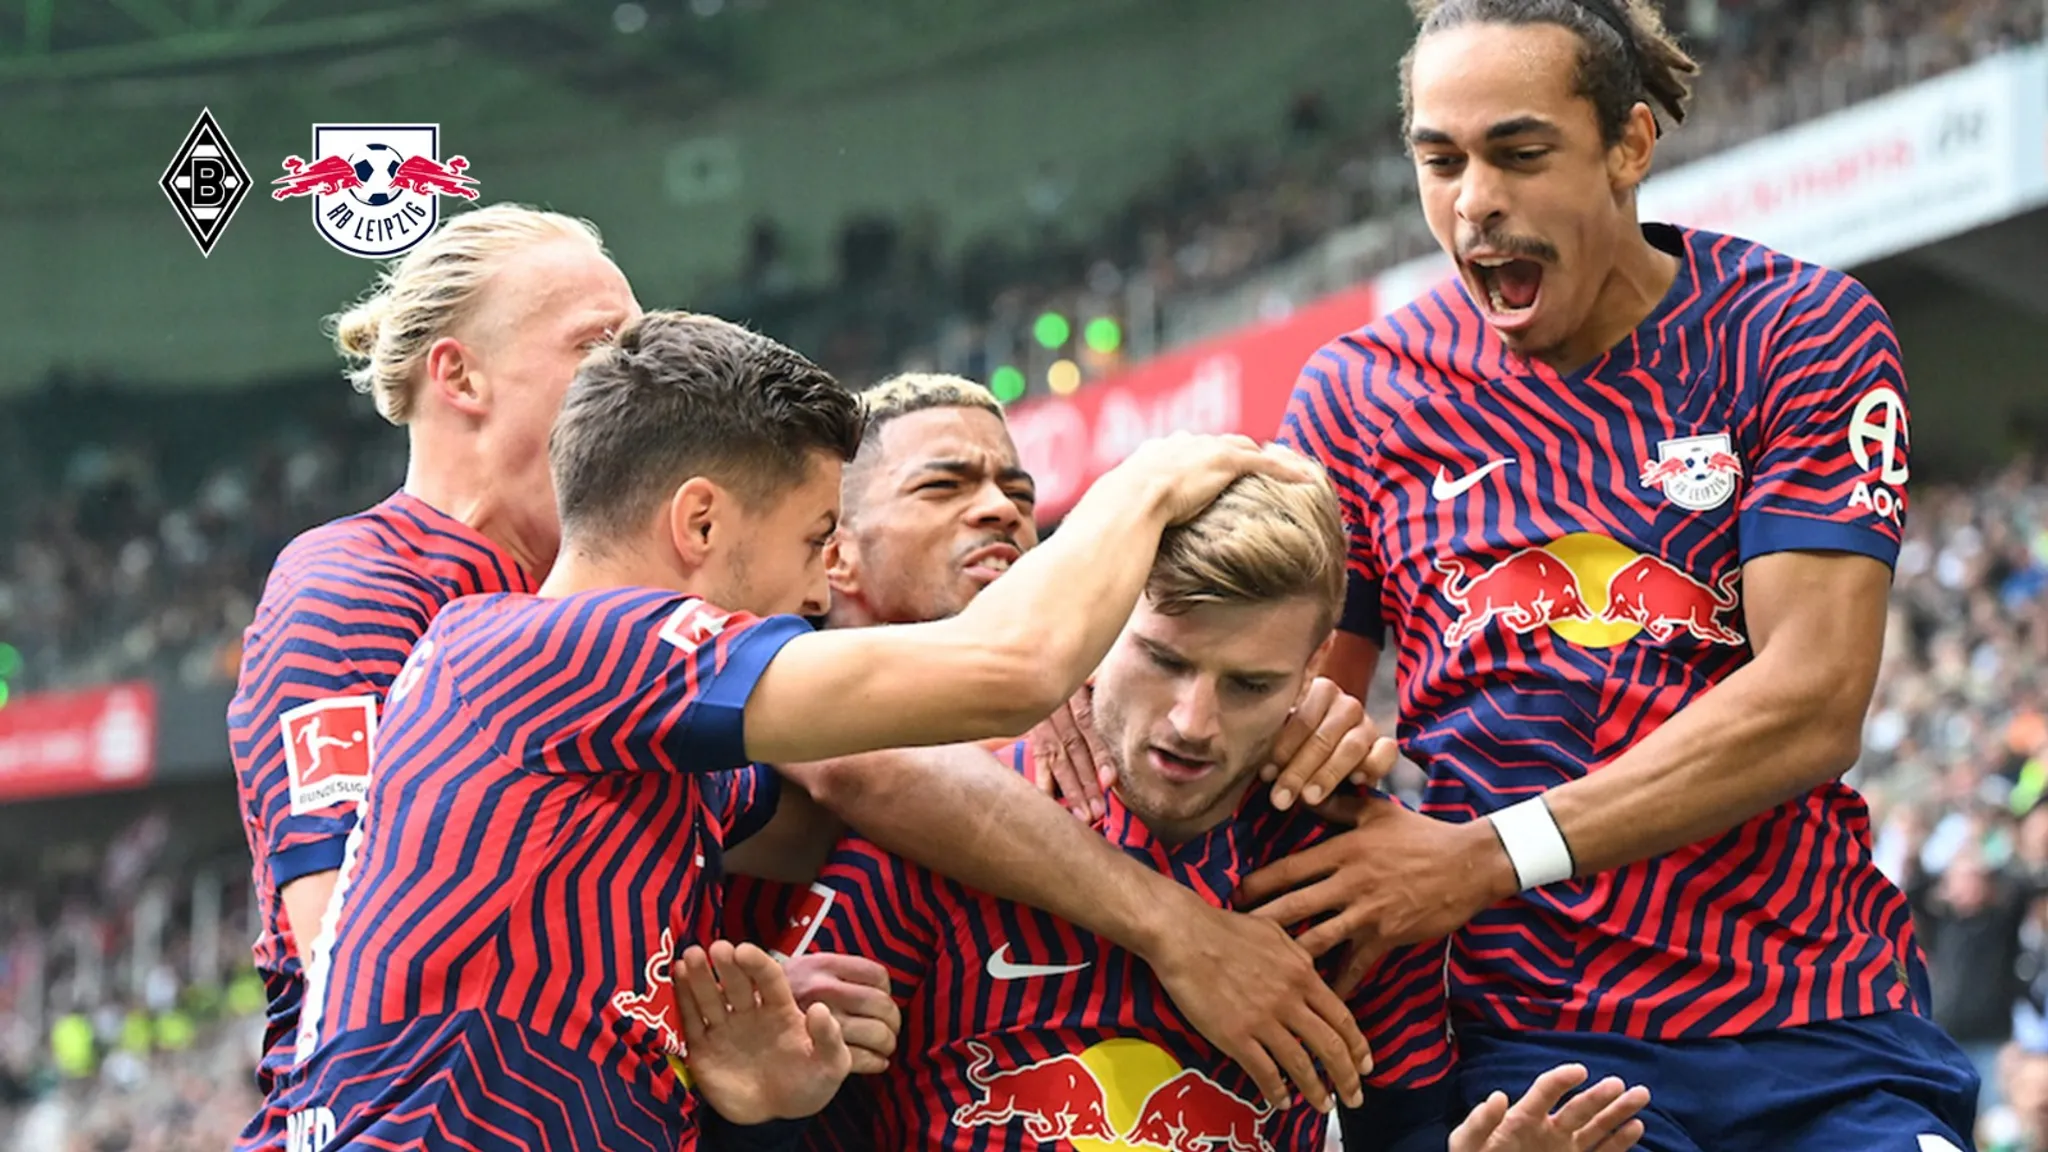 RBL celebrate after going up 1-0 against Borussia Mönchengladbach.